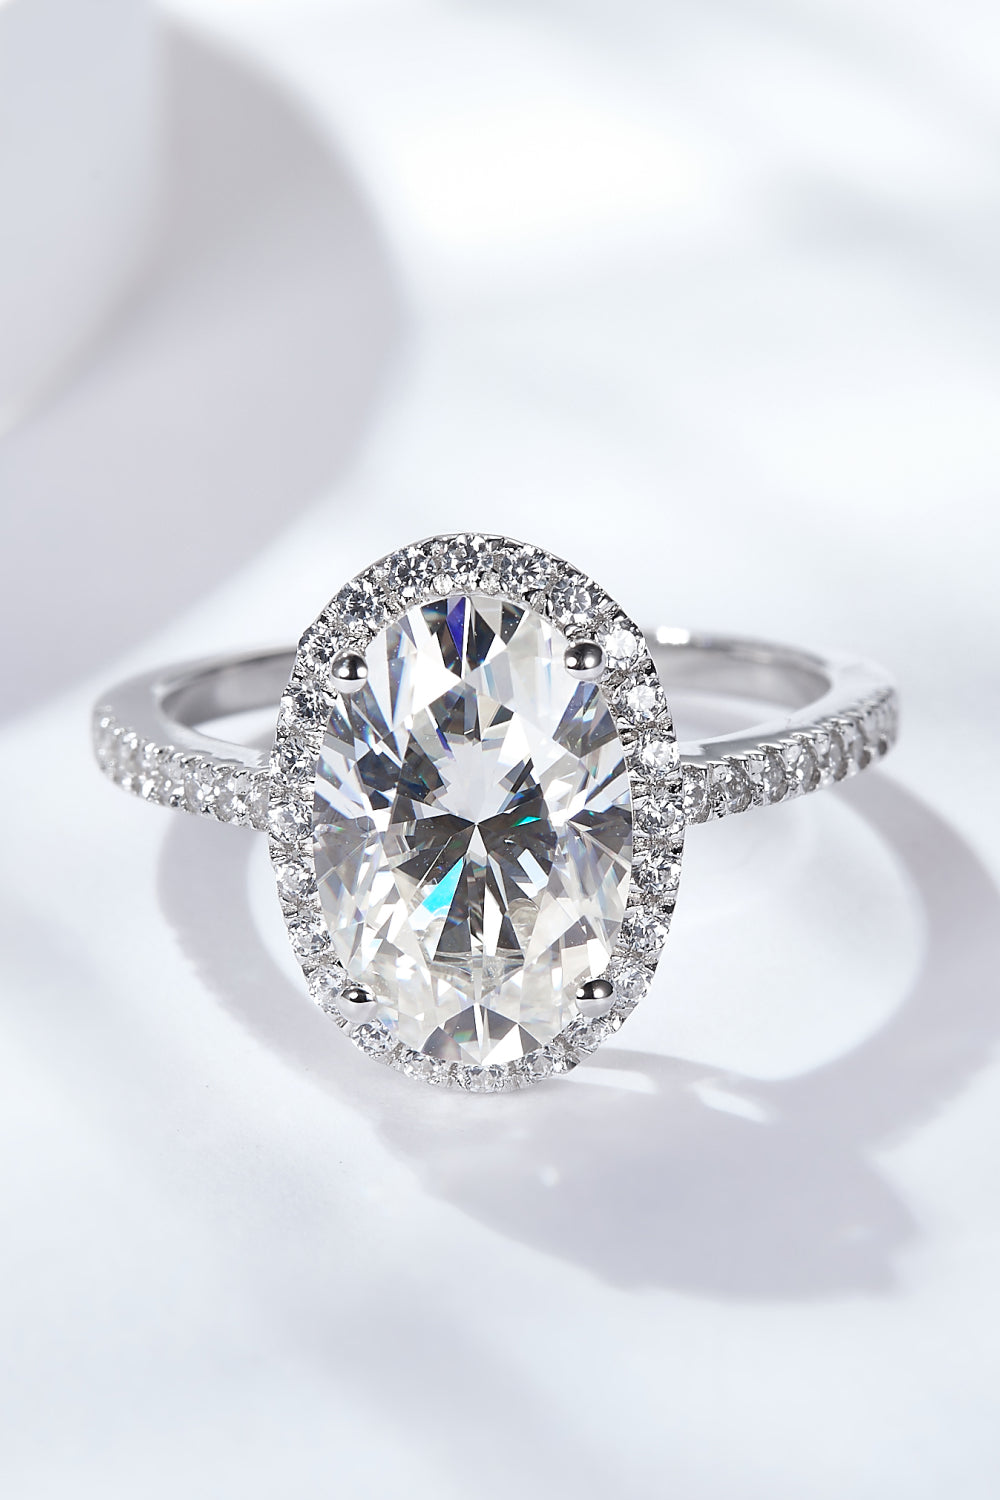 4.5 Carat Moissanite Halo Ring-Rings-Inspired by Justeen-Women's Clothing Boutique in Chicago, Illinois